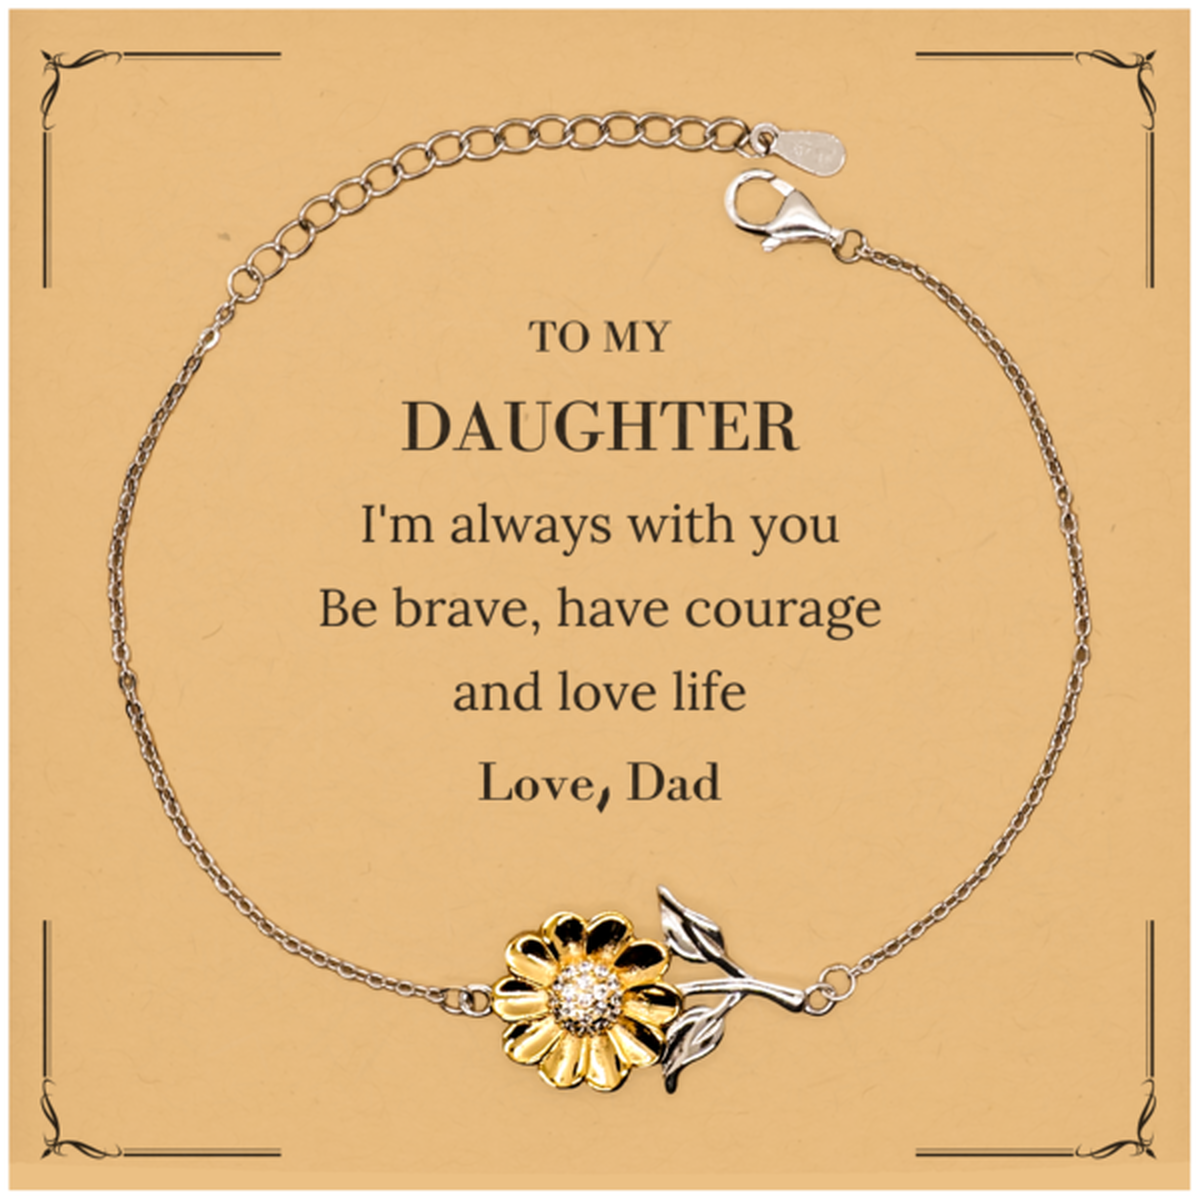 To My Daughter Gifts from Dad, Unique Sunflower Bracelet Inspirational Christmas Birthday Graduation Gifts for Daughter I'm always with you. Be brave, have courage and love life. Love, Dad